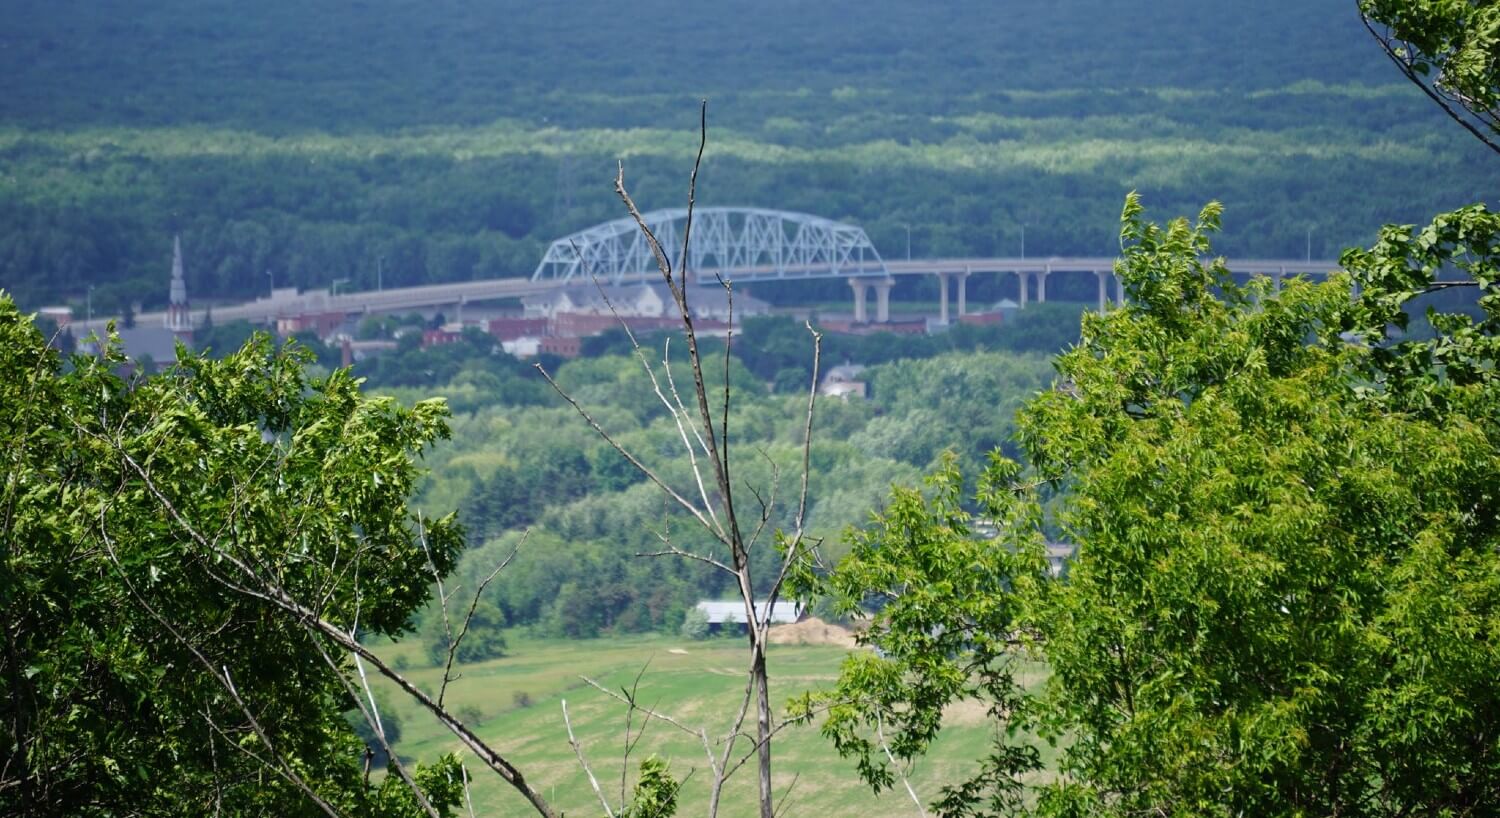 View of lush green valley full of trees with a large bridge in the middle